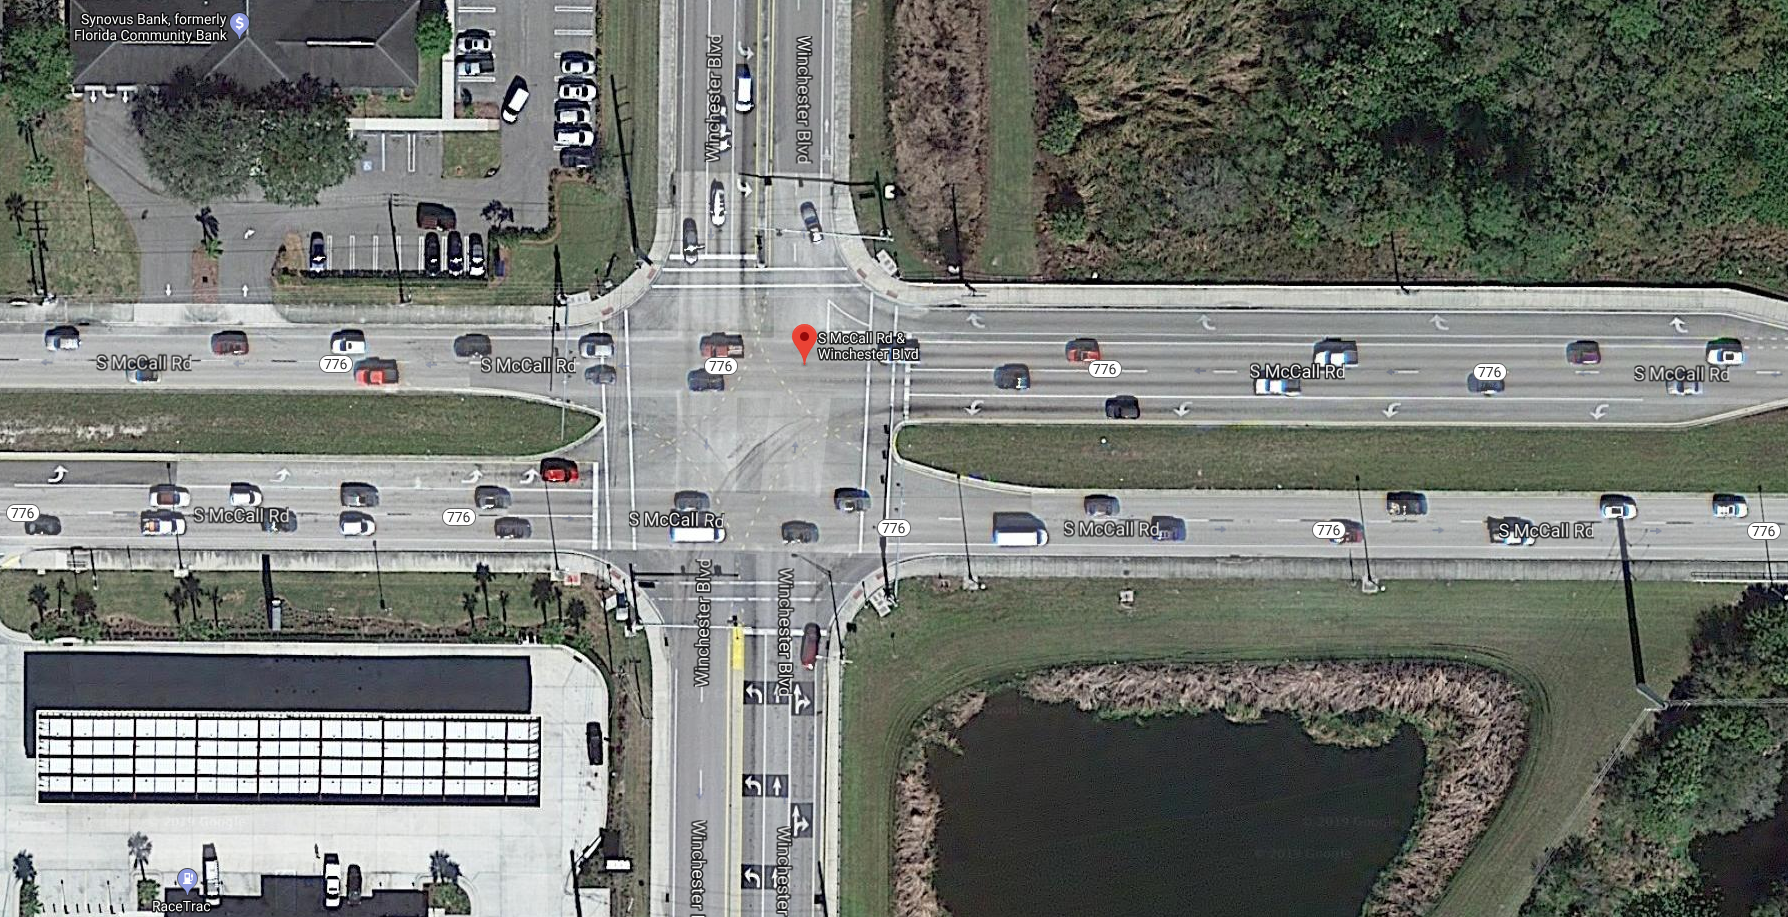 Site of the crash Friday morning. (Credit: Google Maps)